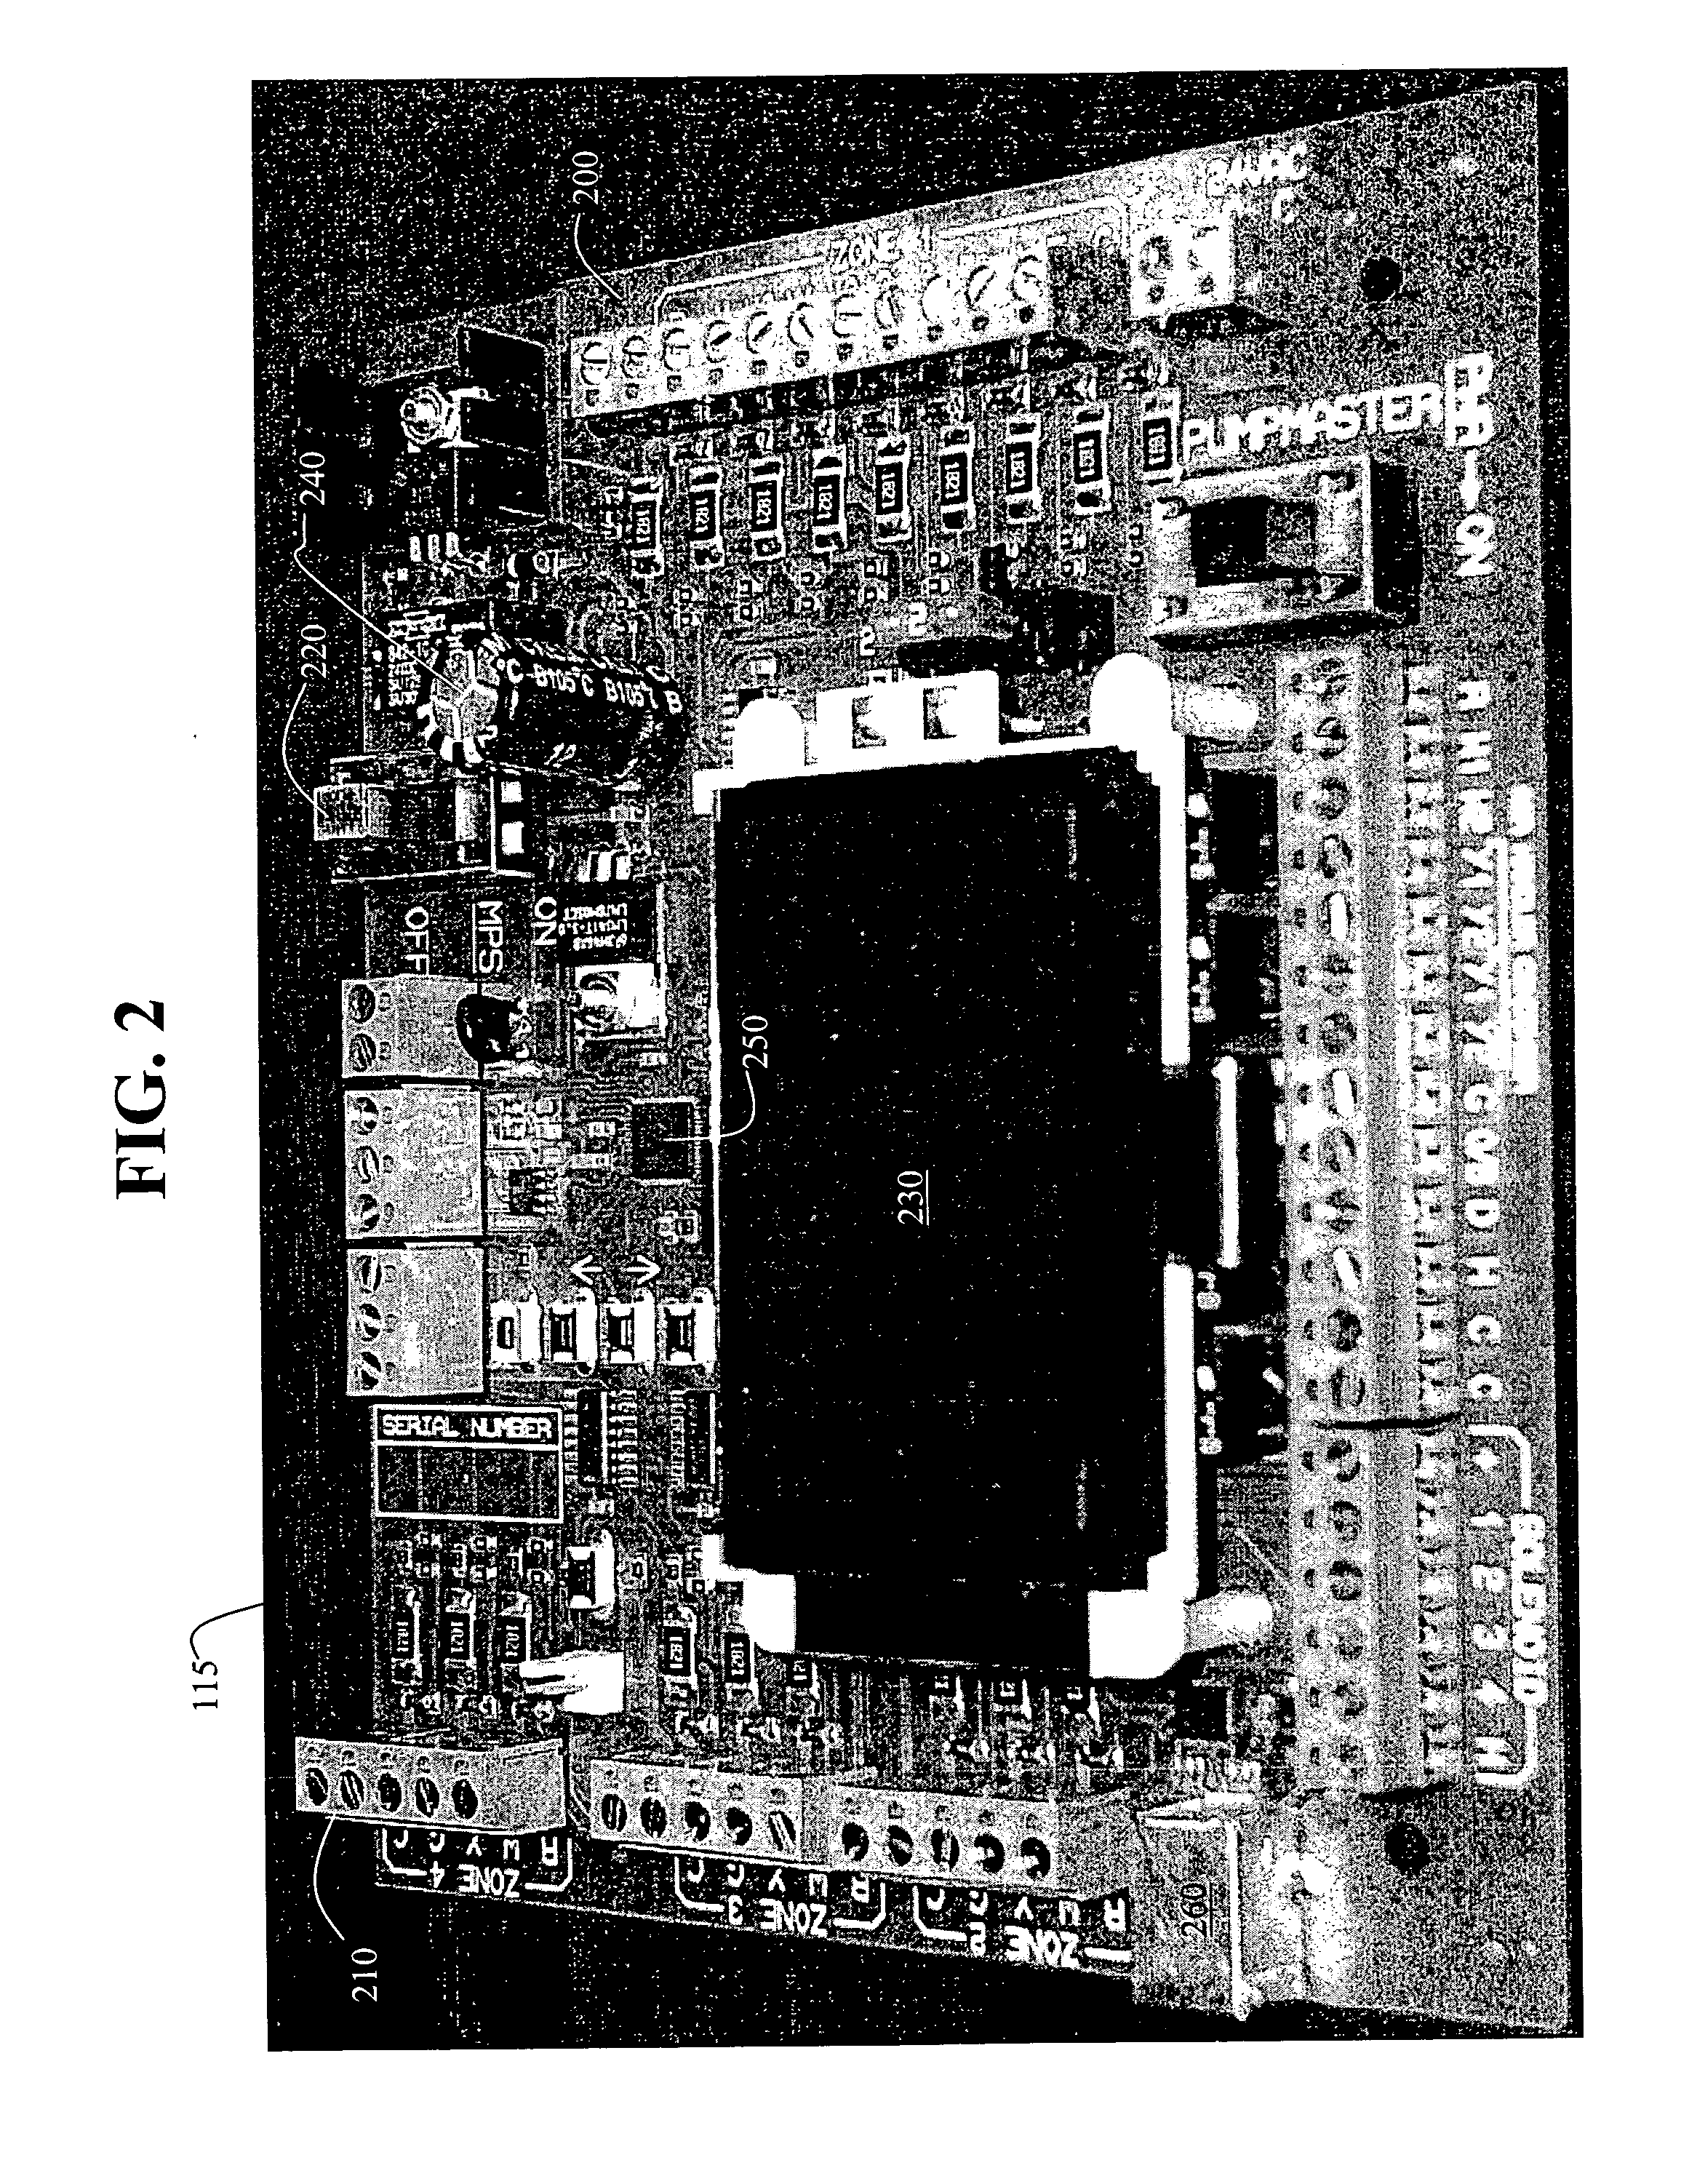 System and method for heat pump oriented zone control